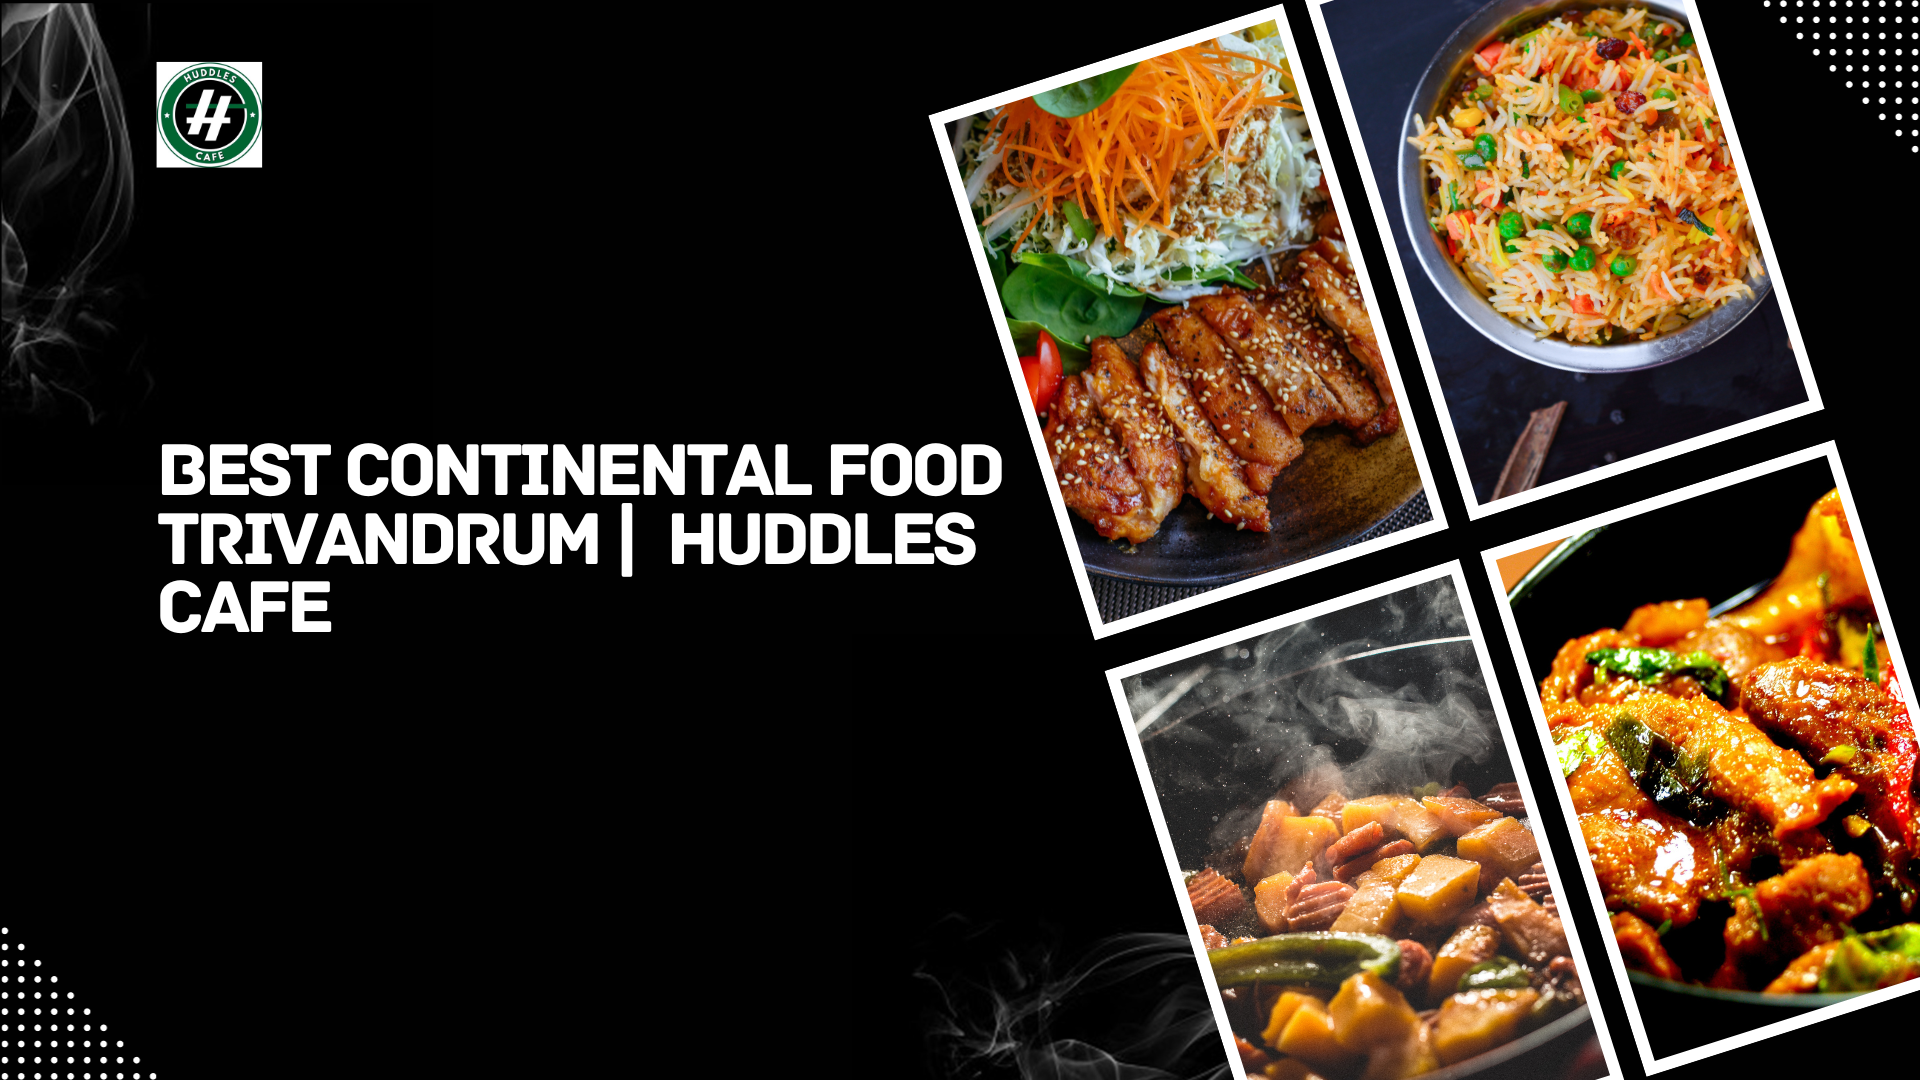 Best Continental Food in Trivandrum | Huddles Cafe